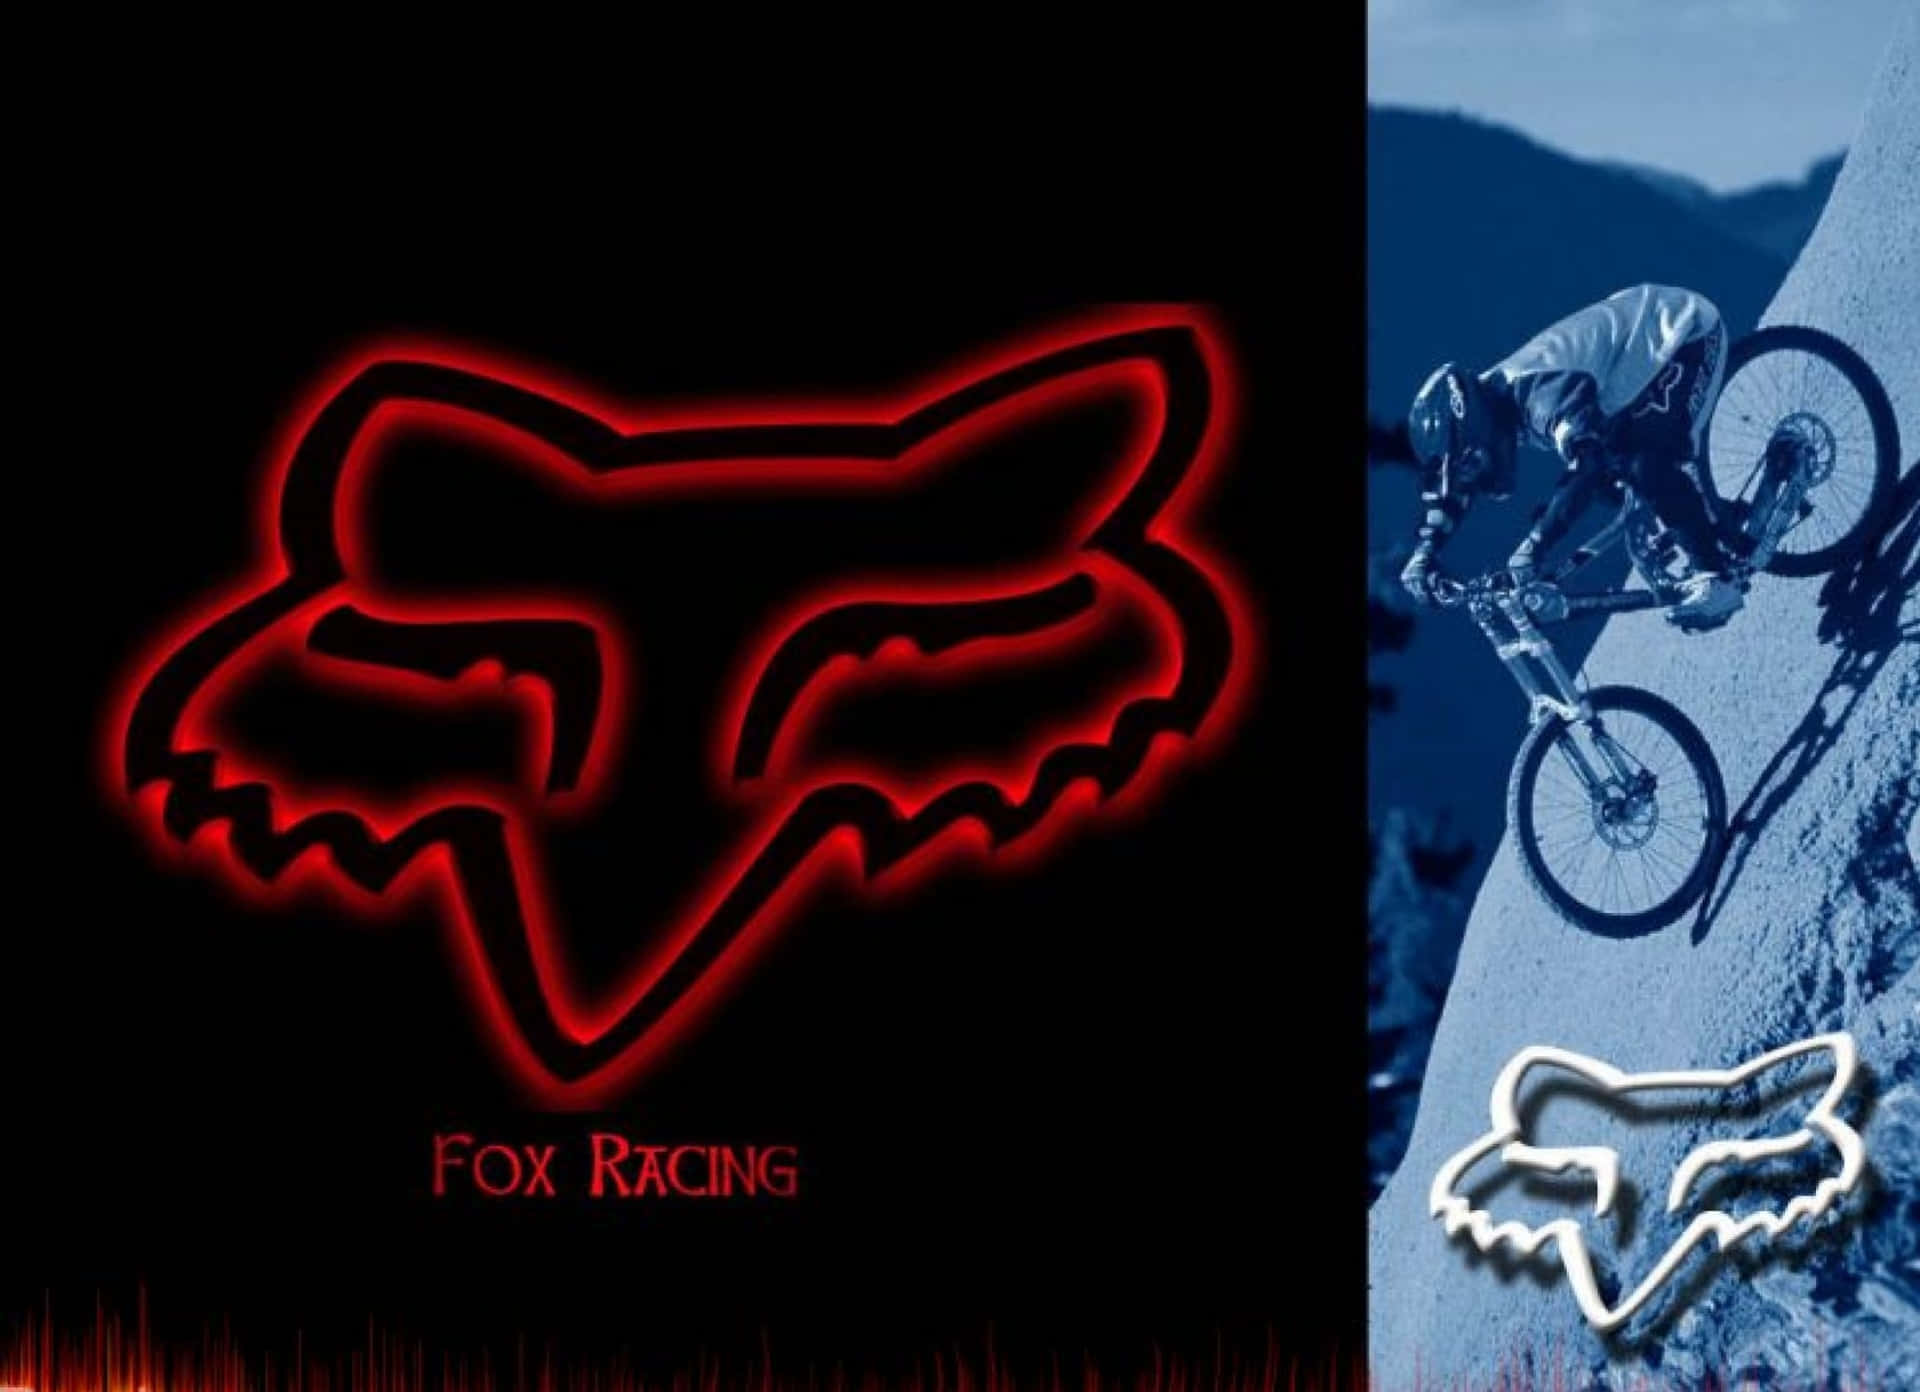 Embrace the Thrill with Fox Racing Wallpaper